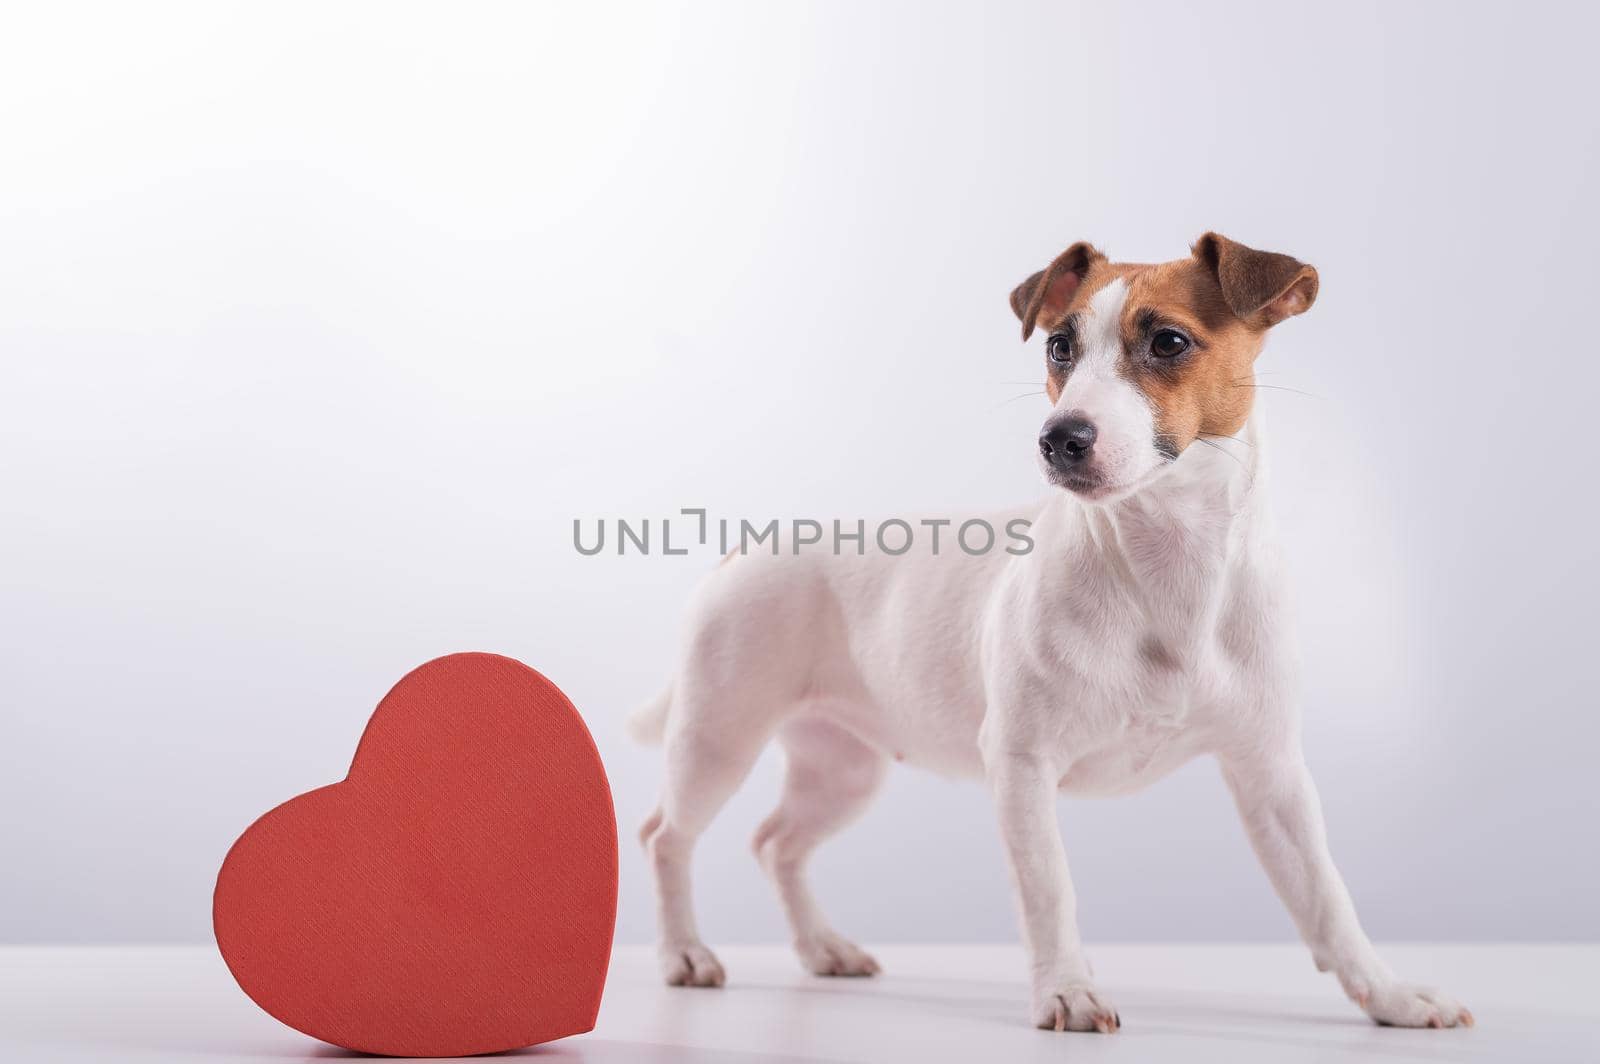 Jack Russell Terrier next to a heart-shaped box on a white background. A dog gives a romantic gift on a date.